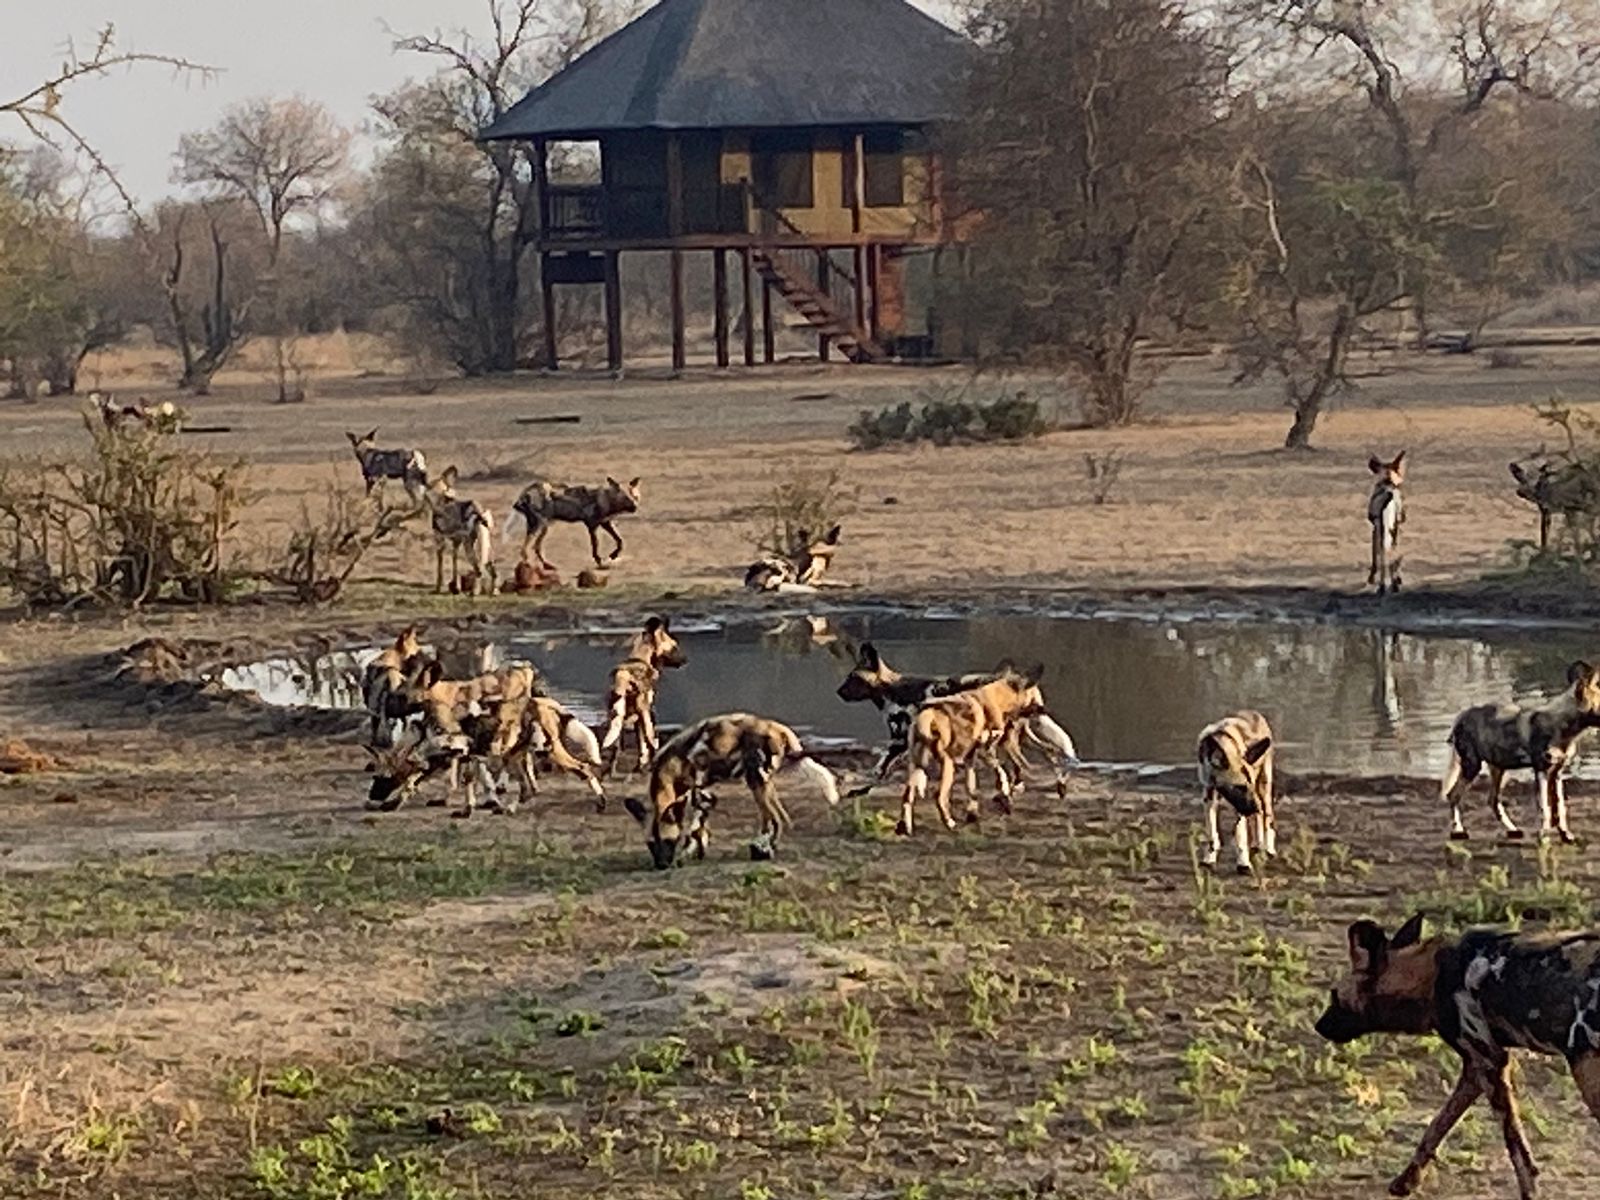 African Wild Dogs outside of nThambo Tree Camp